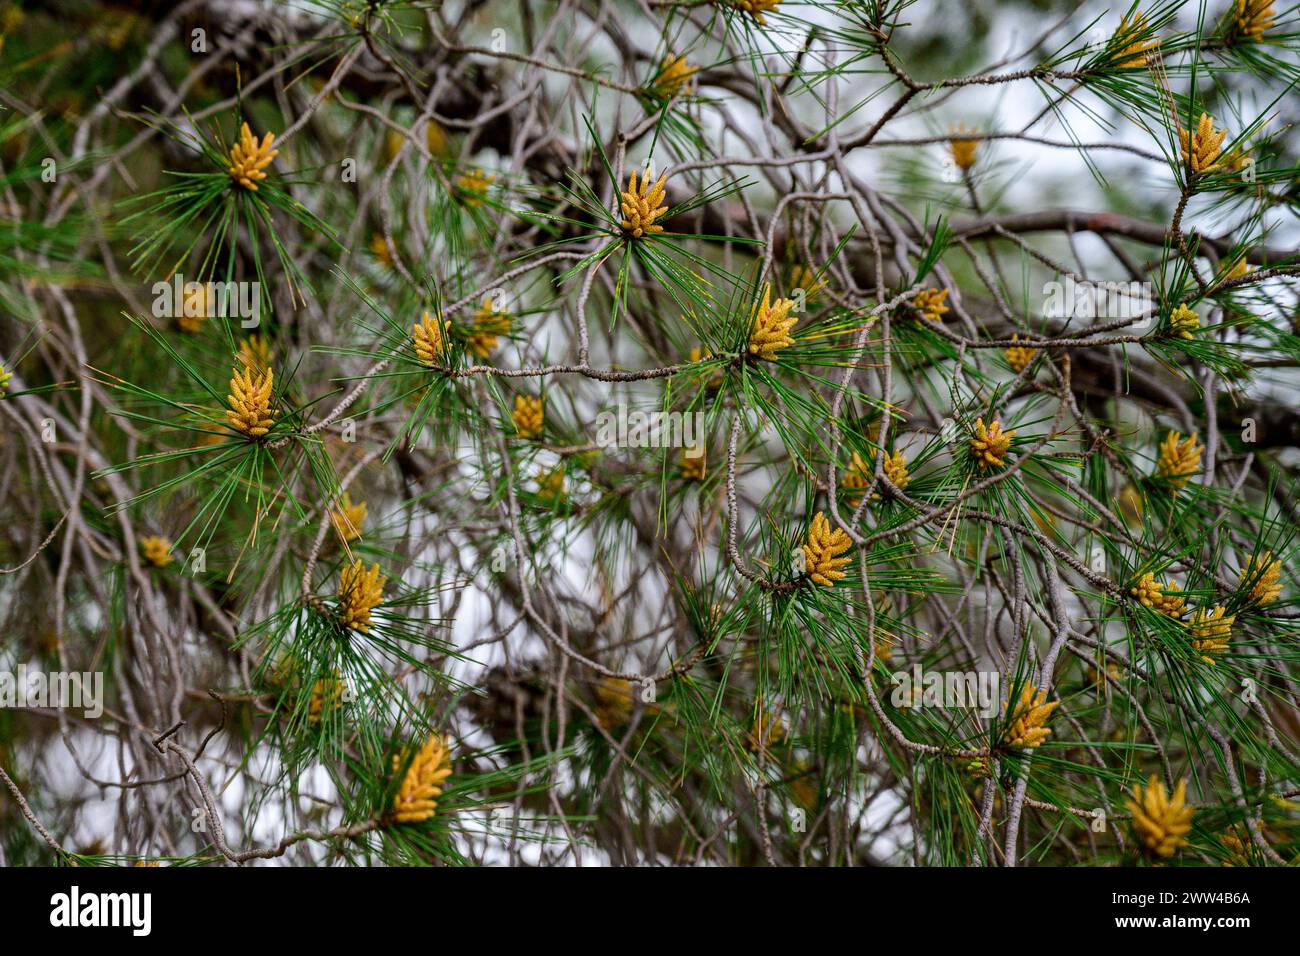 Male flowers of the Aleppo Pine Pinus halepensis, commonly known as the Aleppo pine, also known as the Jerusalem pine, is a pine native to the Mediter Stock Photo